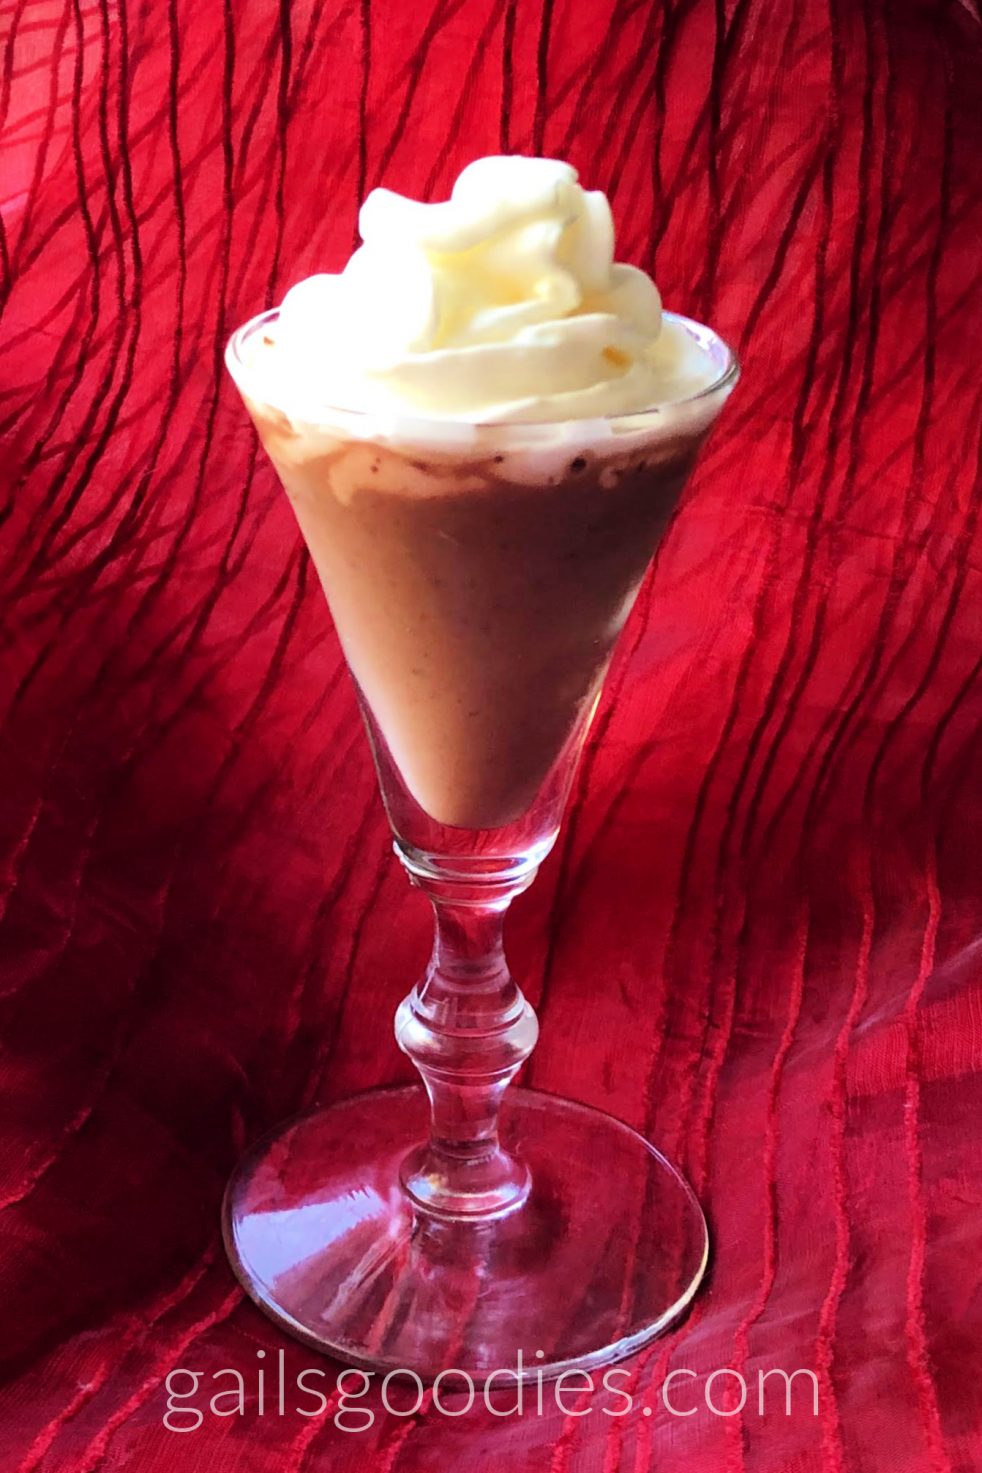 A plain stemmed liqueur glass is filled with a milk chocolate colored liqueur. Whipeed cream is swirled on the top and the photo has a red organza background and is lit from the left side.